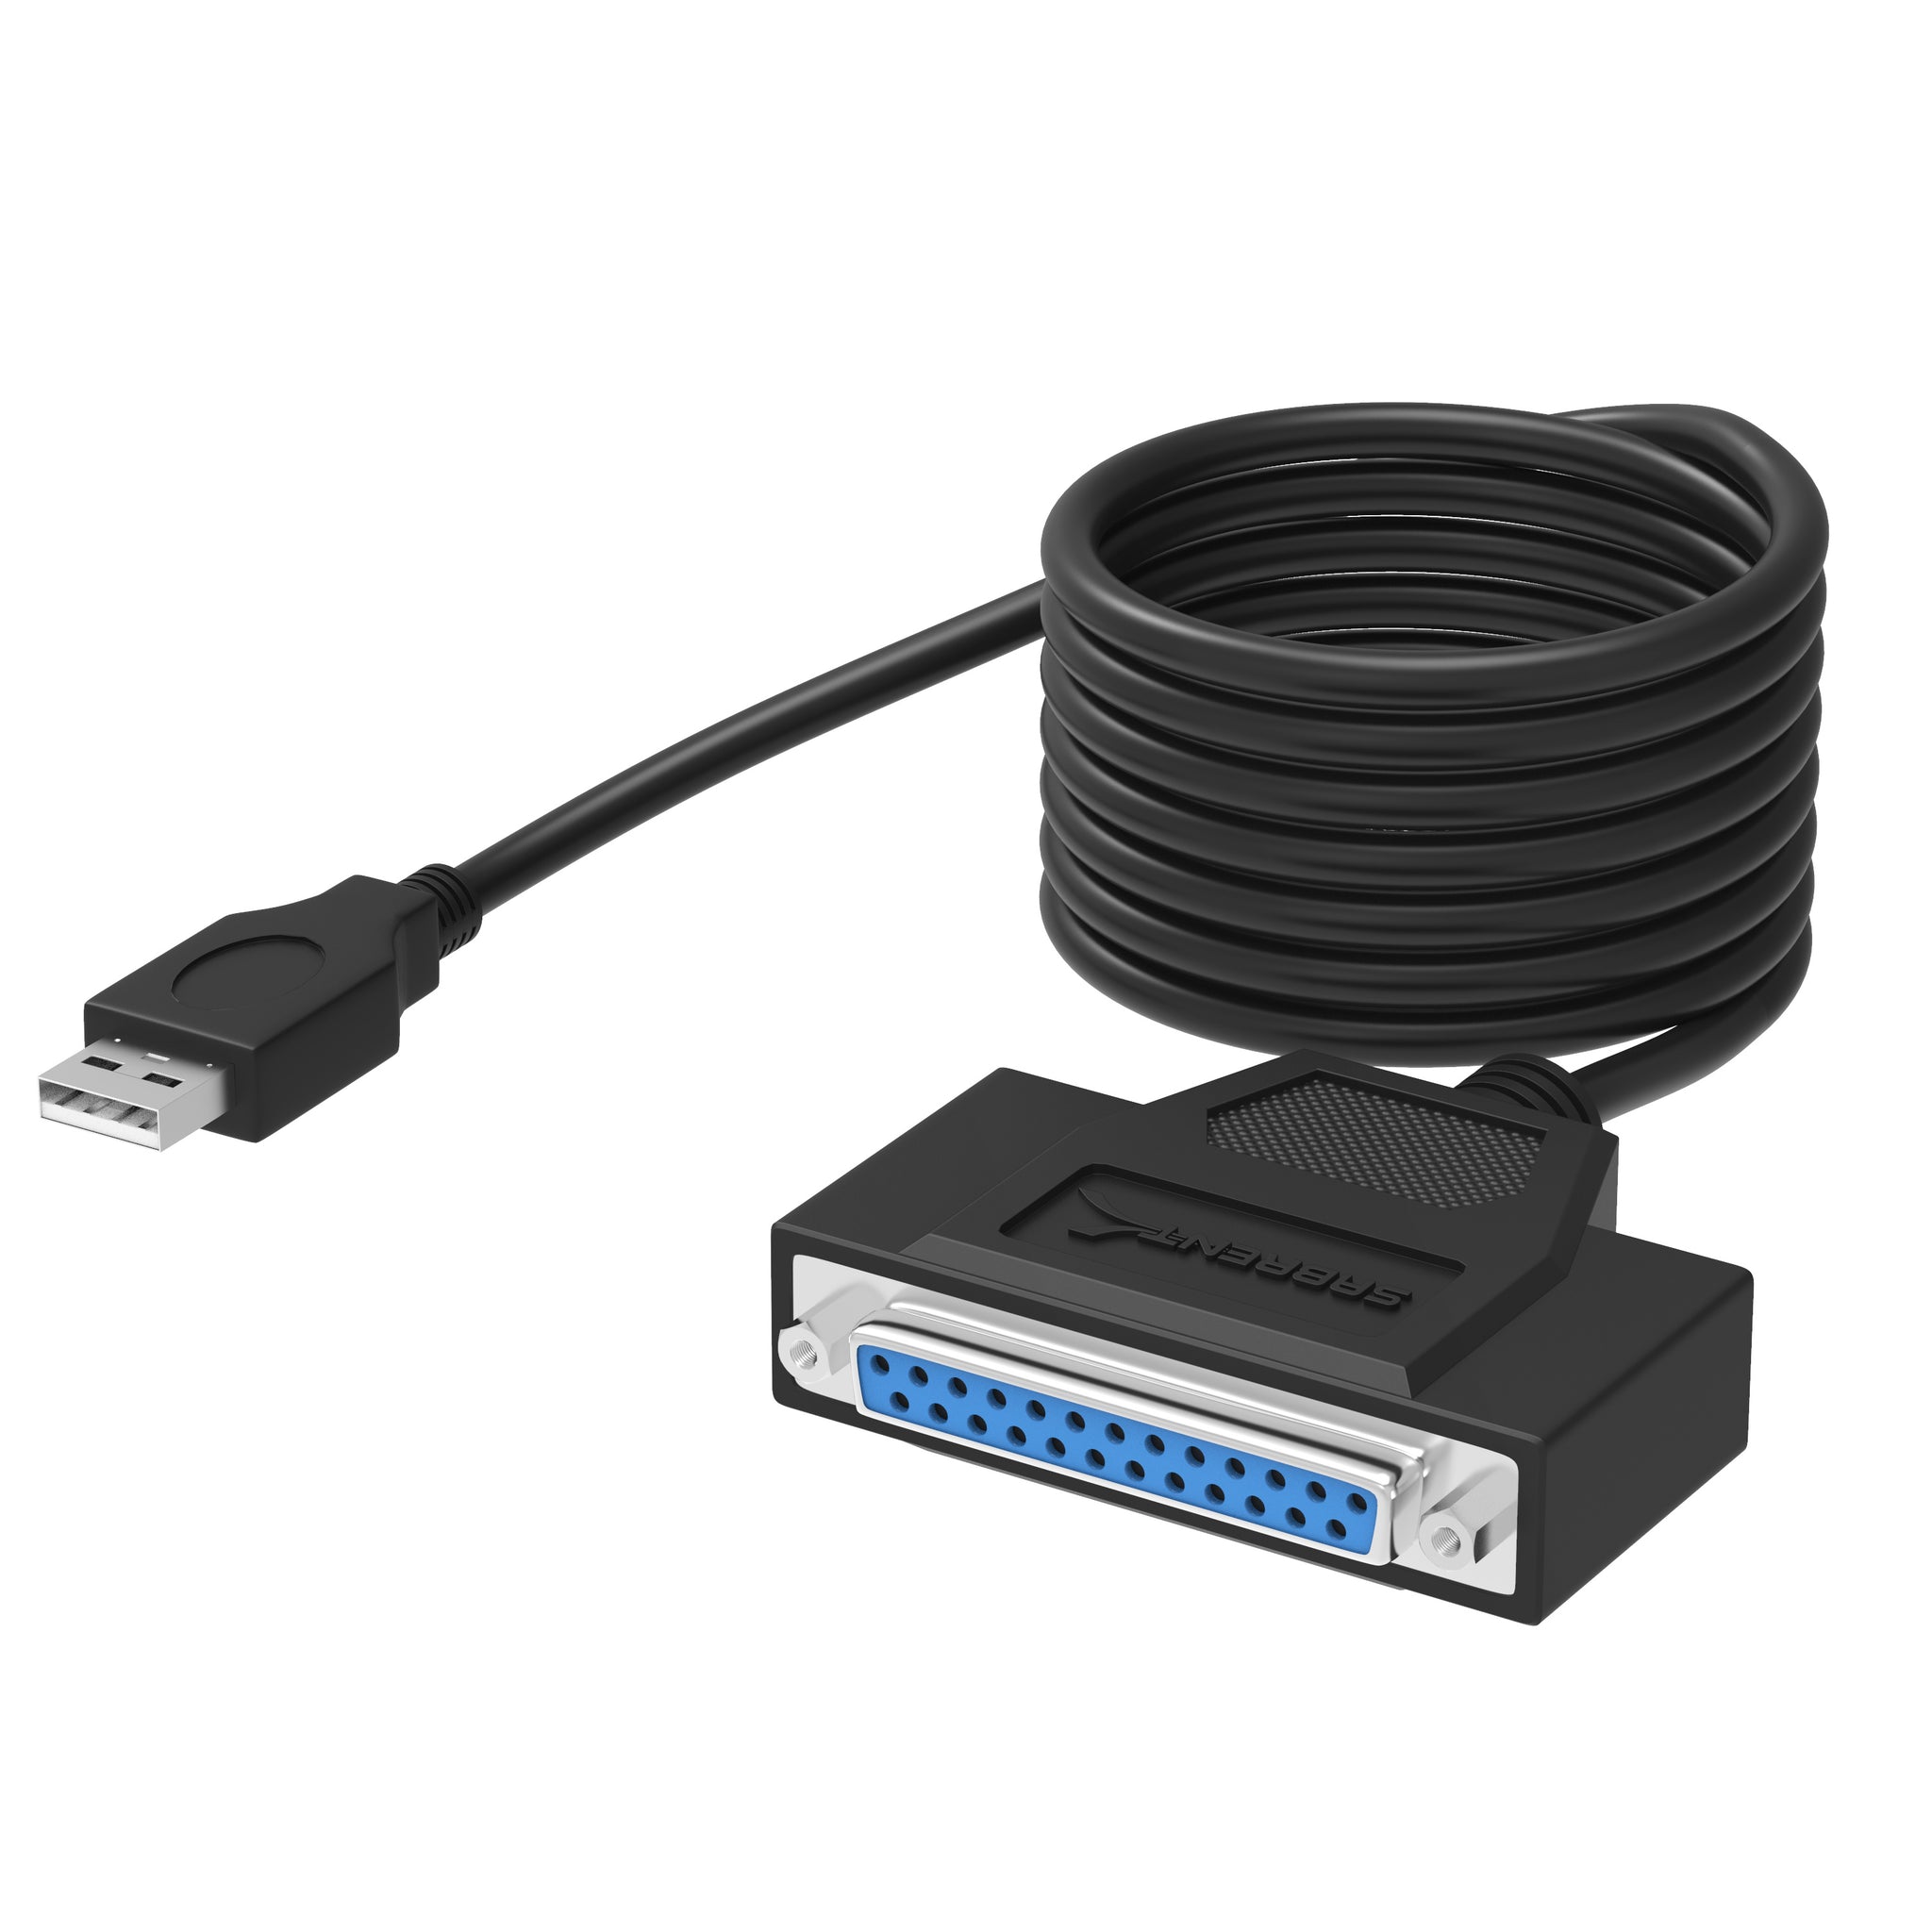 USB To DB25 IEEE-1284 Cable Adapter [HEXNUT Conne - Sabrent